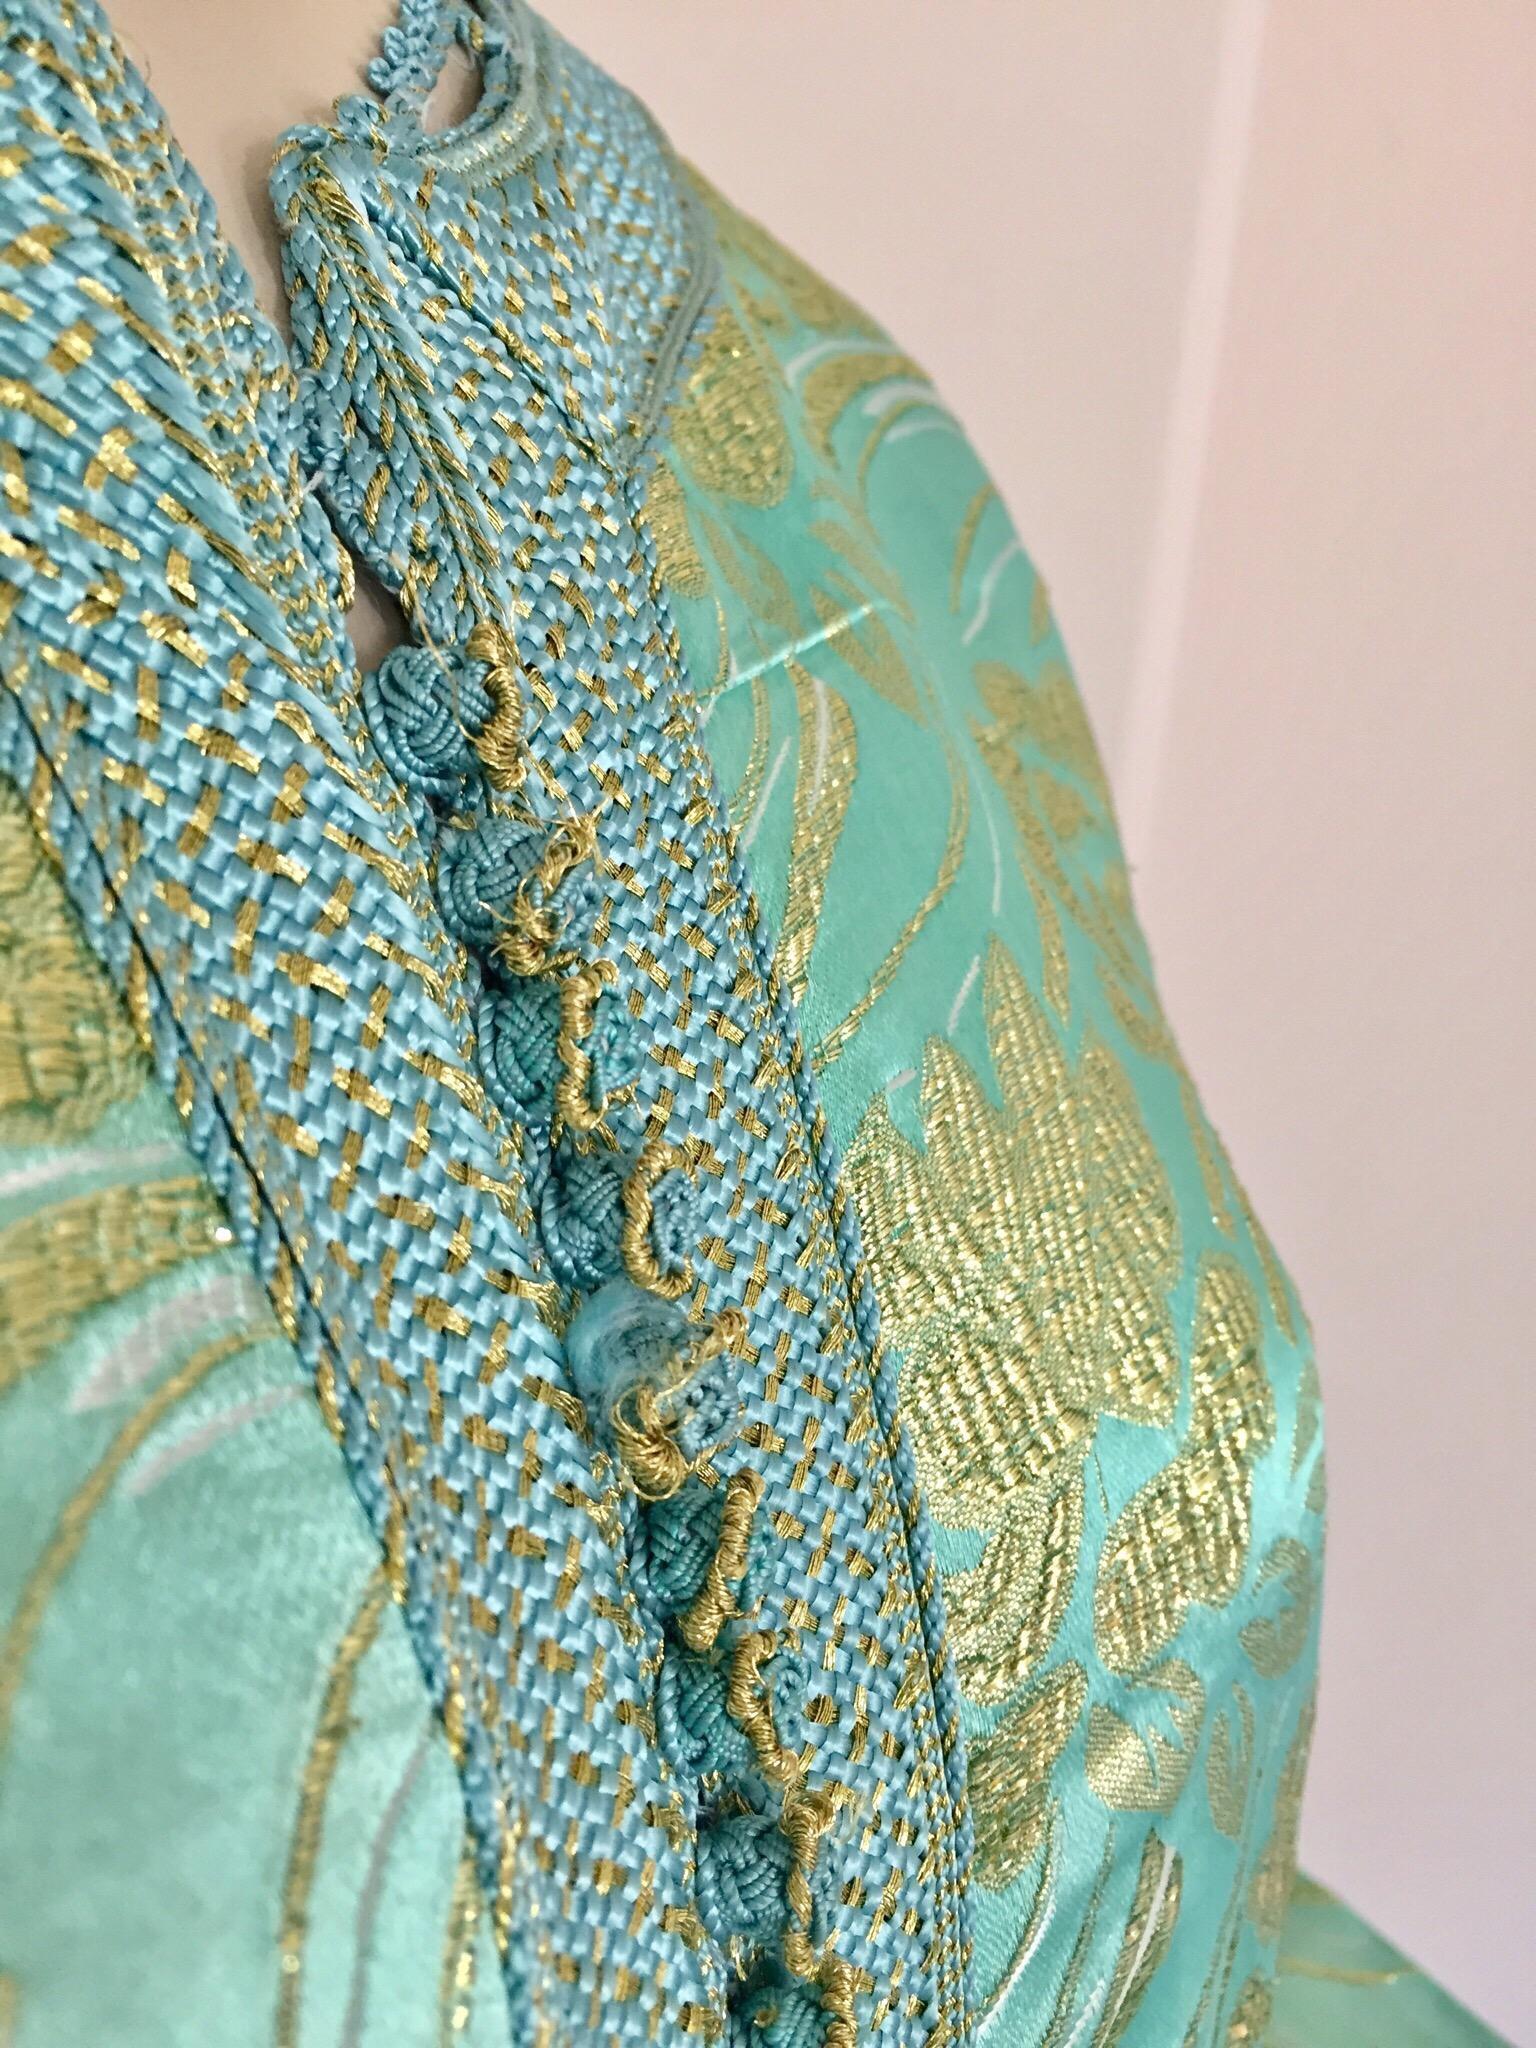 Moroccan Kaftan in Turquoise and Gold Floral Brocade Metallic Lame For Sale 7